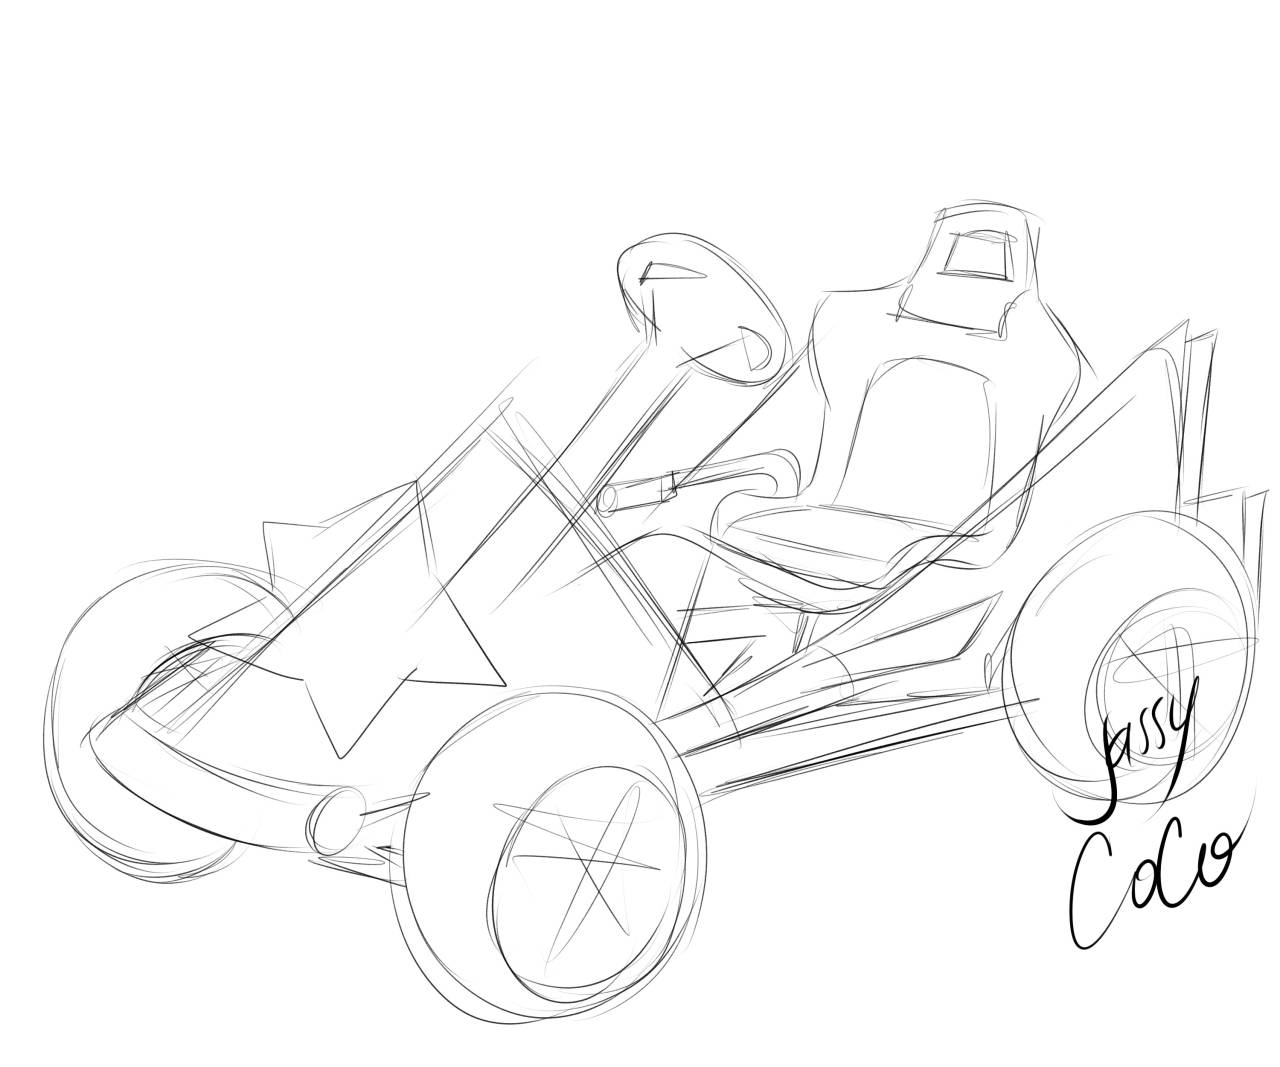 jassycoco:  WIPS…. What people never knew of me…I used to draw cars a lot. I